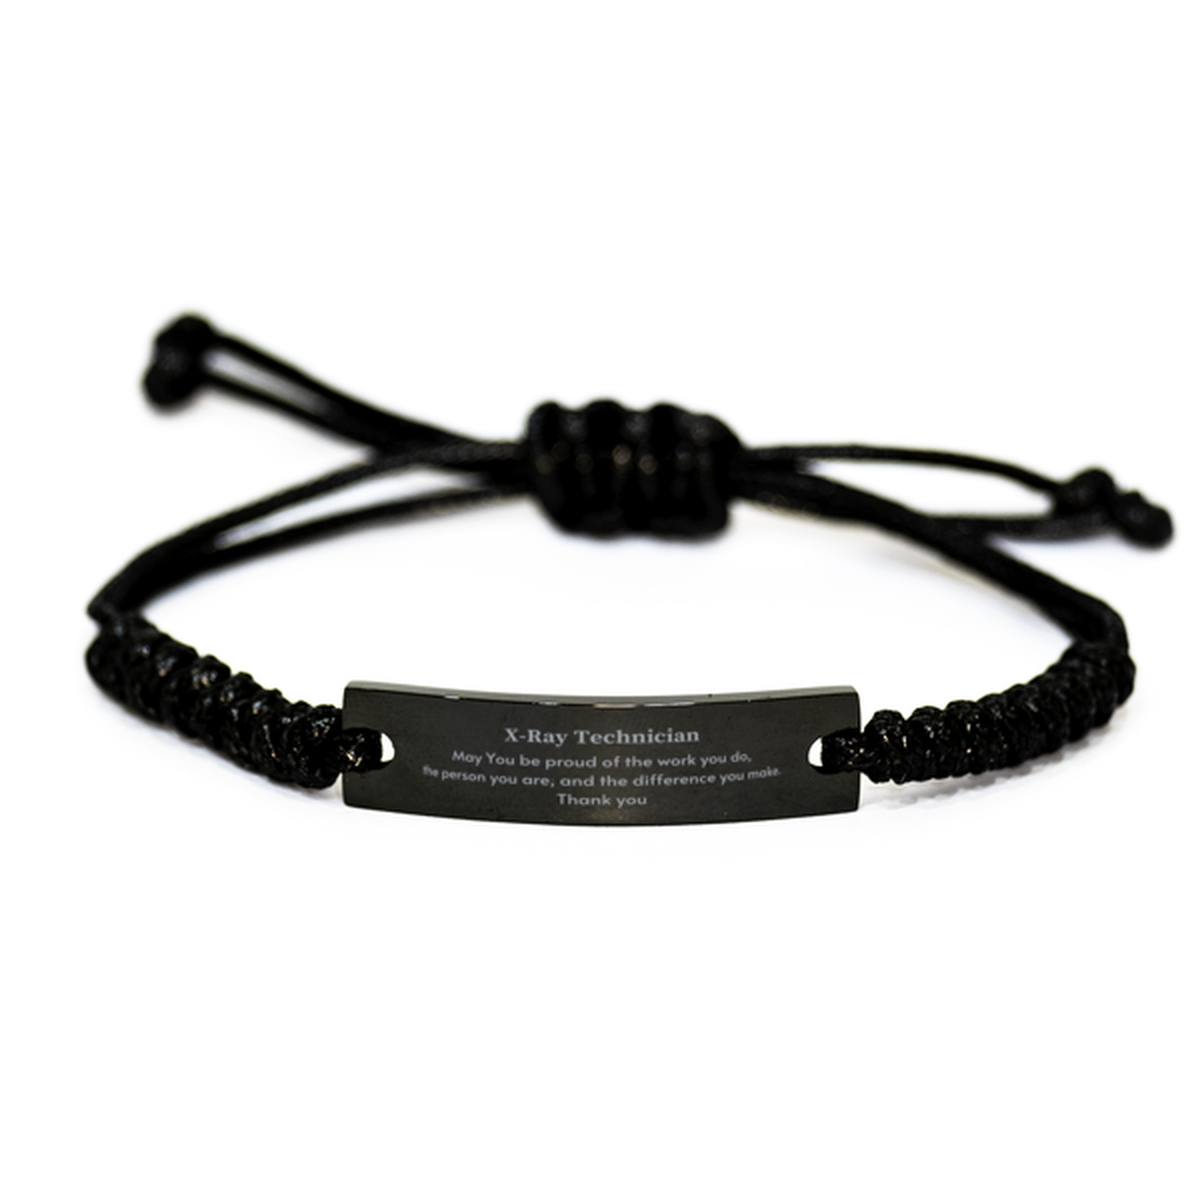 Heartwarming Black Rope Bracelet Retirement Coworkers Gifts for X-Ray Technician, X-Ray Technician May You be proud of the work you do, the person you are Gifts for Boss Men Women Friends